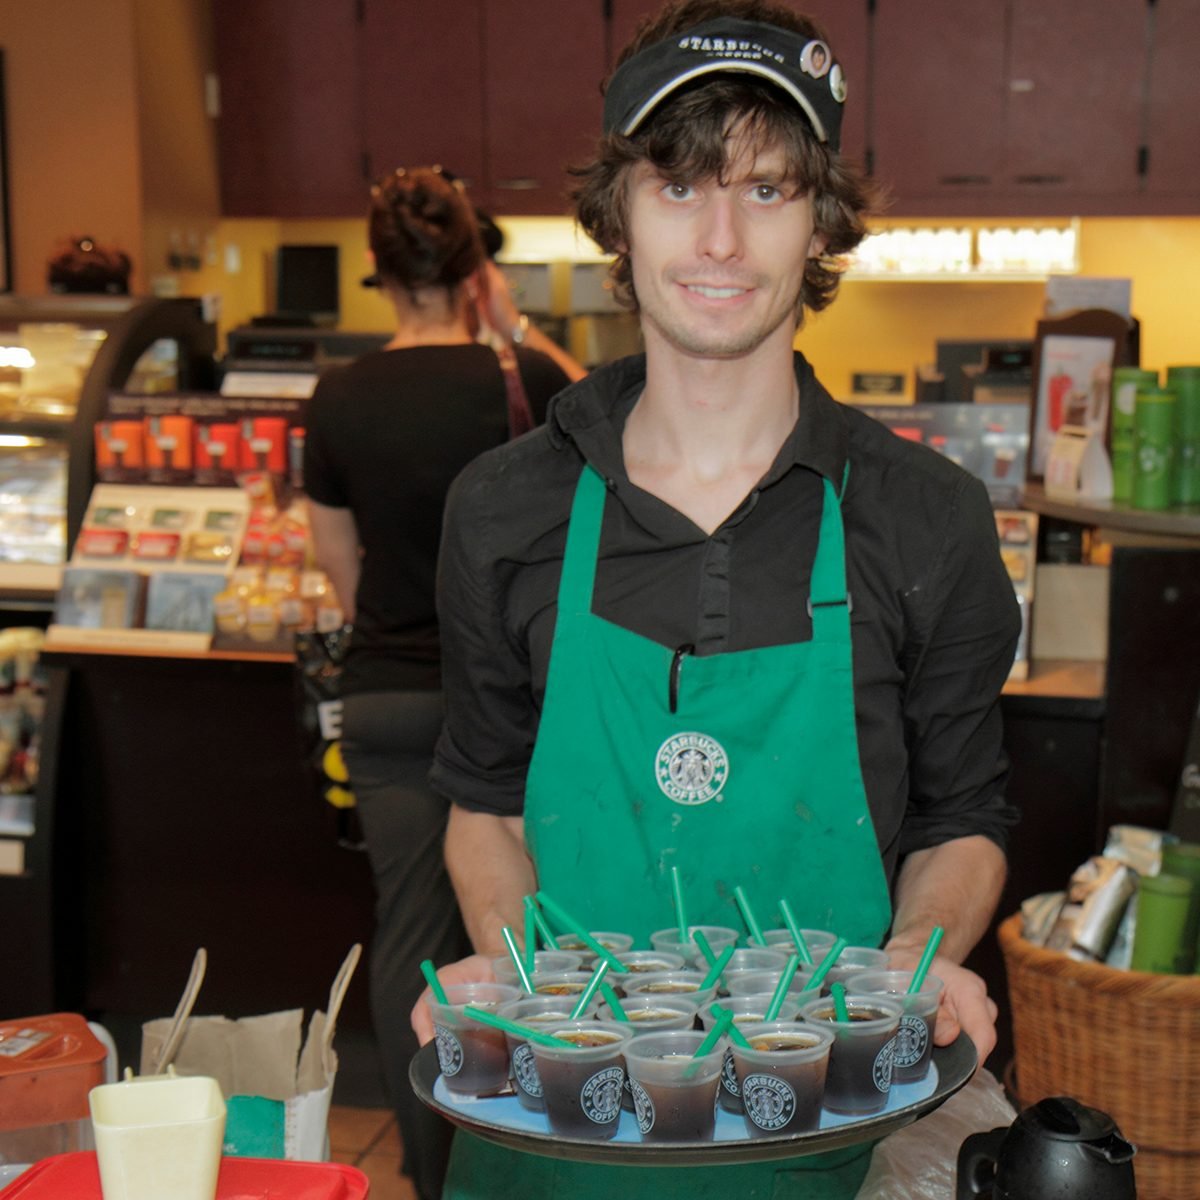 A man offering free samples at Starbucks on Market Street. (Photo by: Jeffrey Greenberg/Universal Images Group via Getty Images)